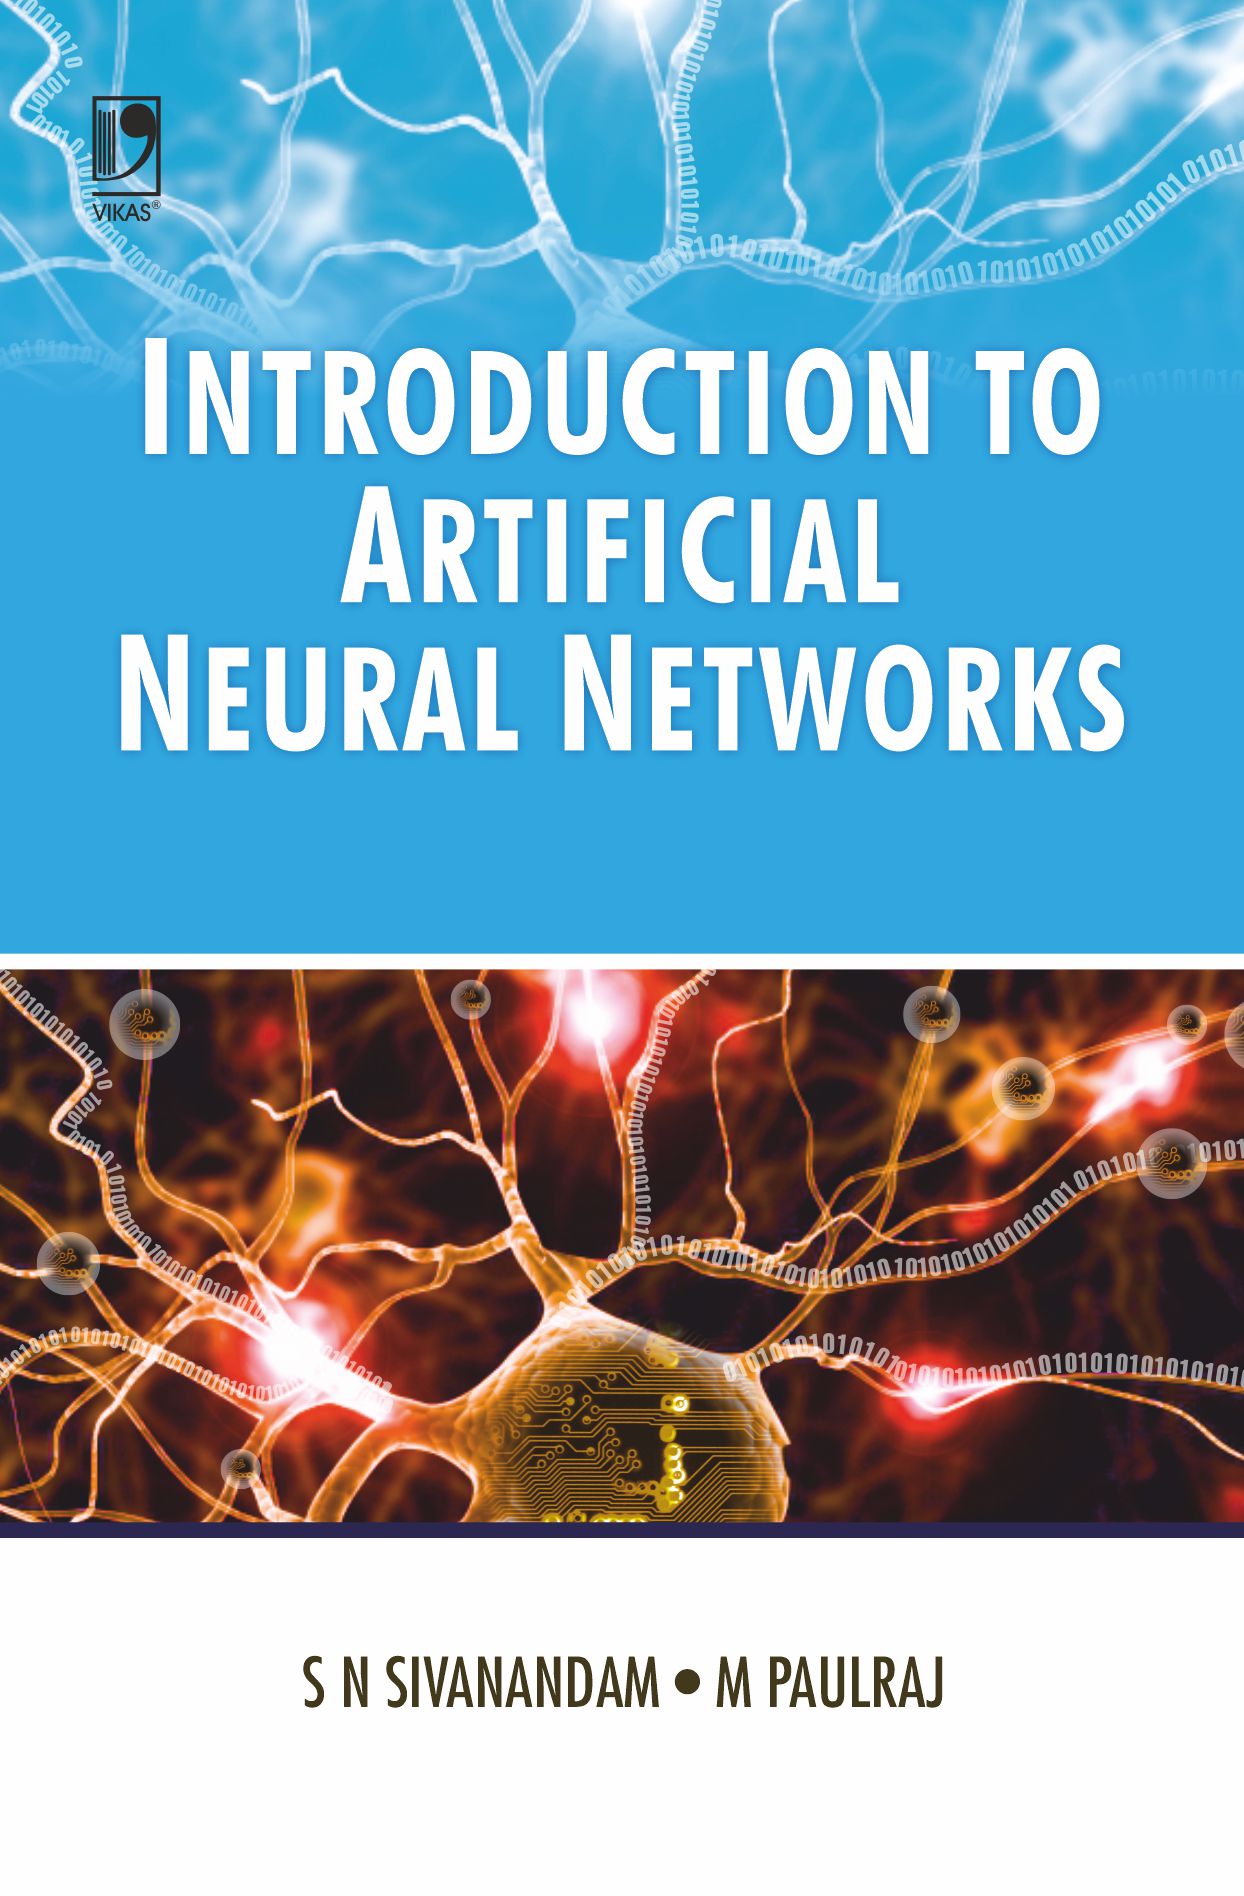 Introduction to Artificial Neural Networks